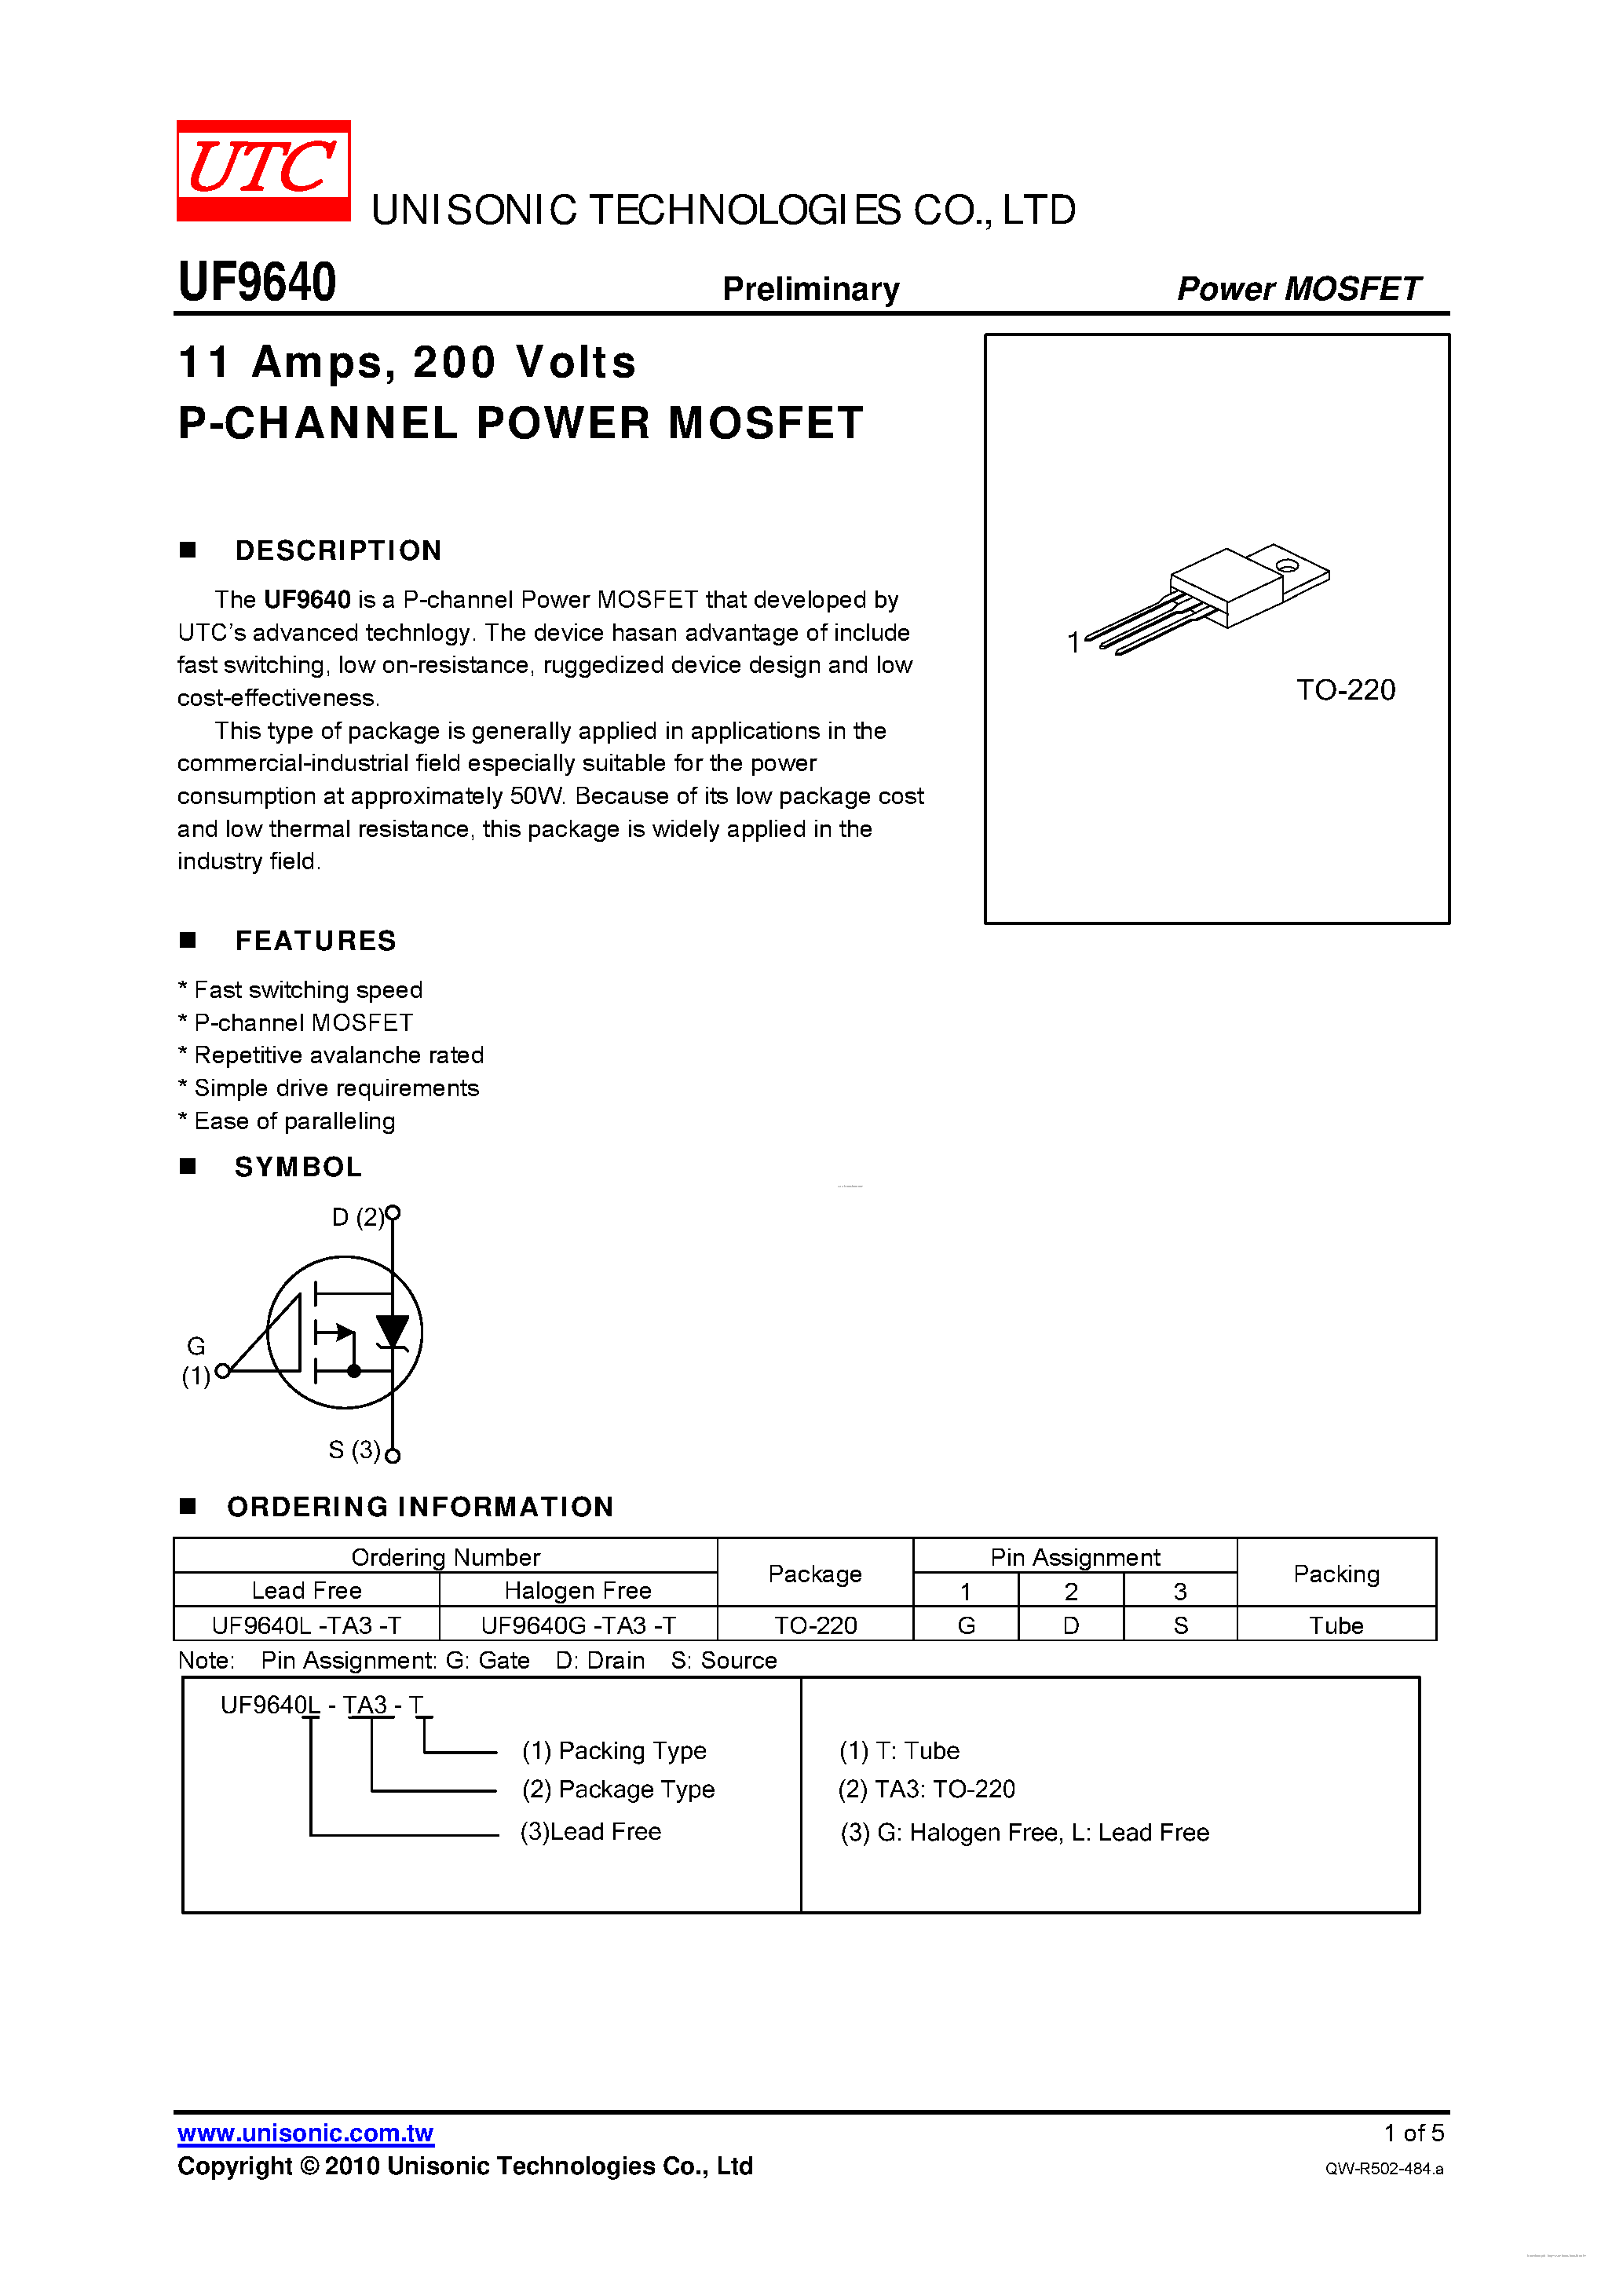 Datasheet UF9640 - 200 Volts P-CHANNEL POWER MOSFET page 1